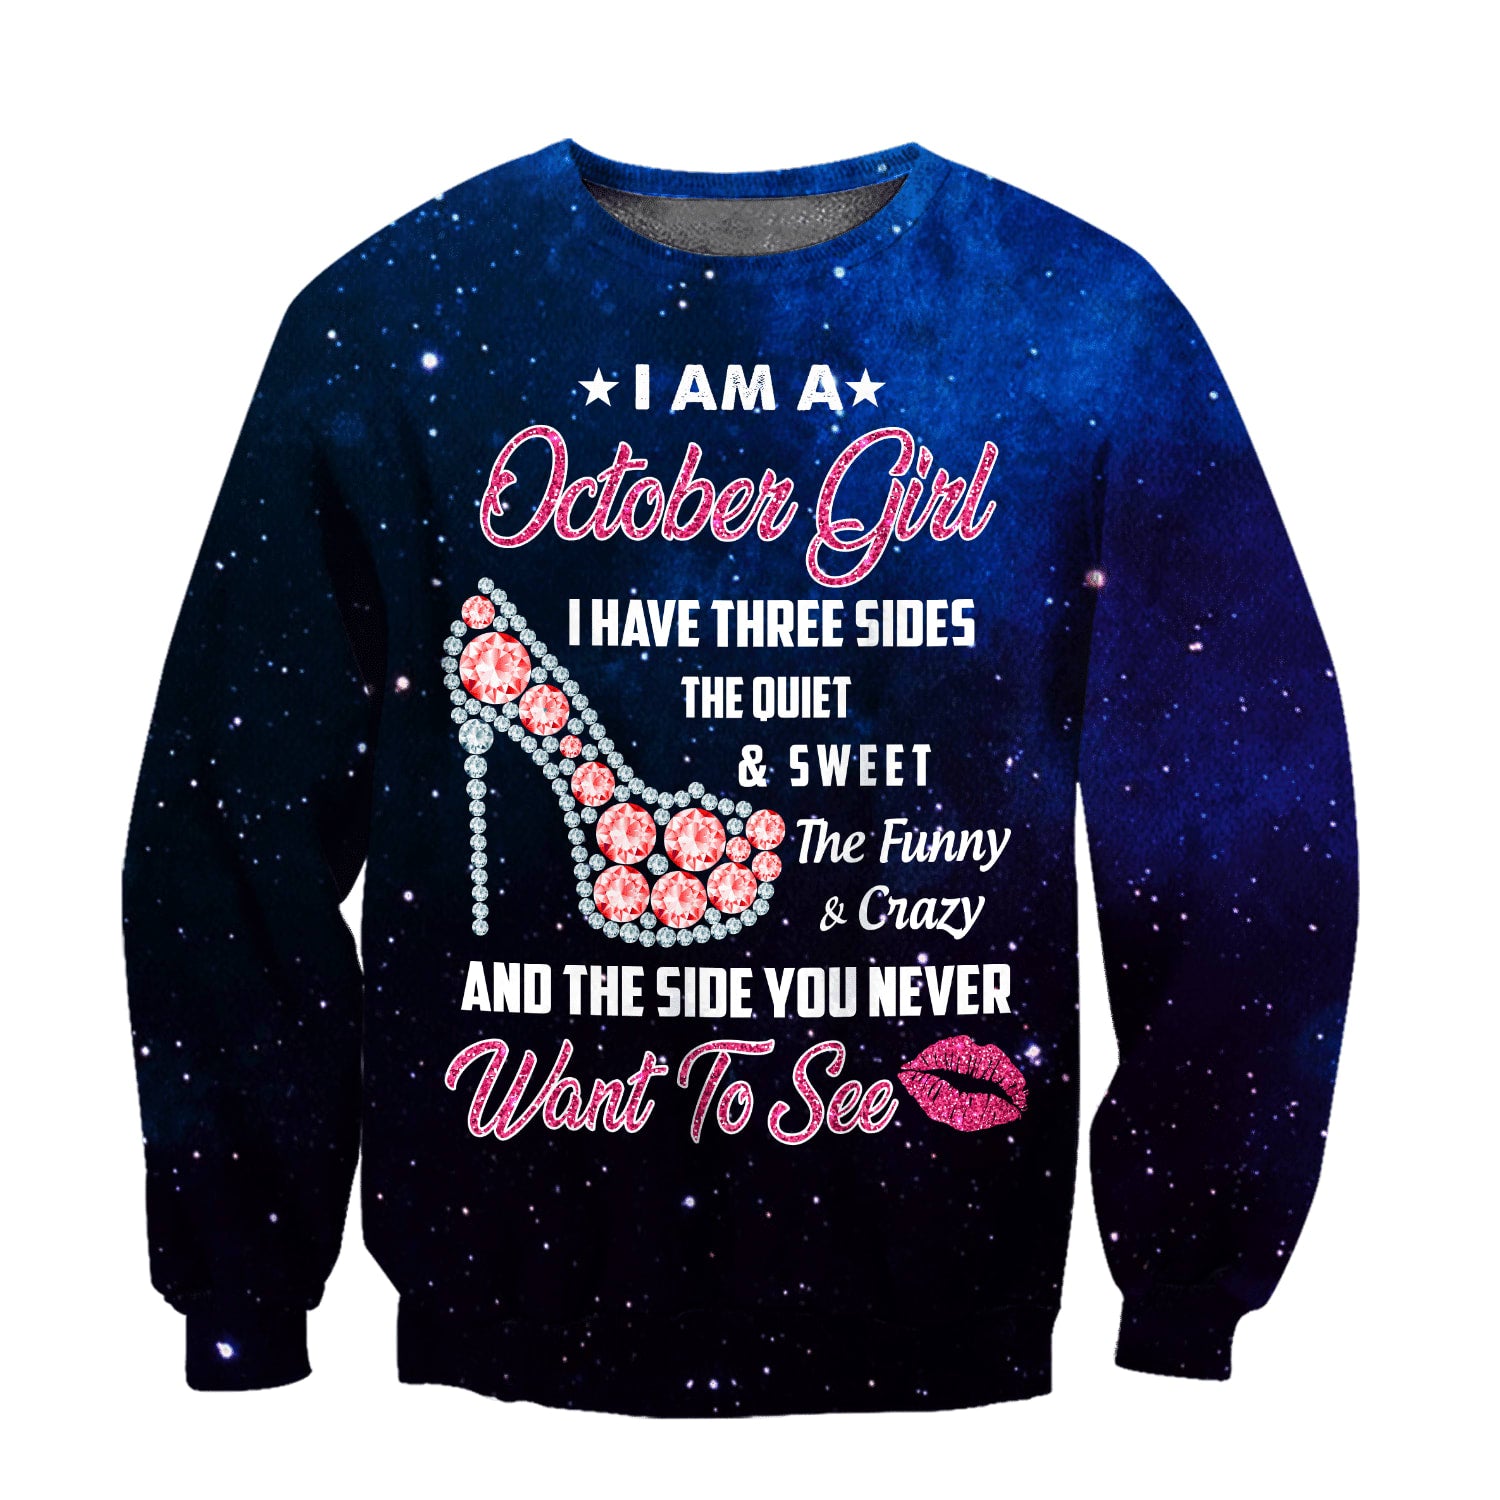 October Girl I Have 3 Sides You Never Want To See - Christian Sweatshirt For Women & Men